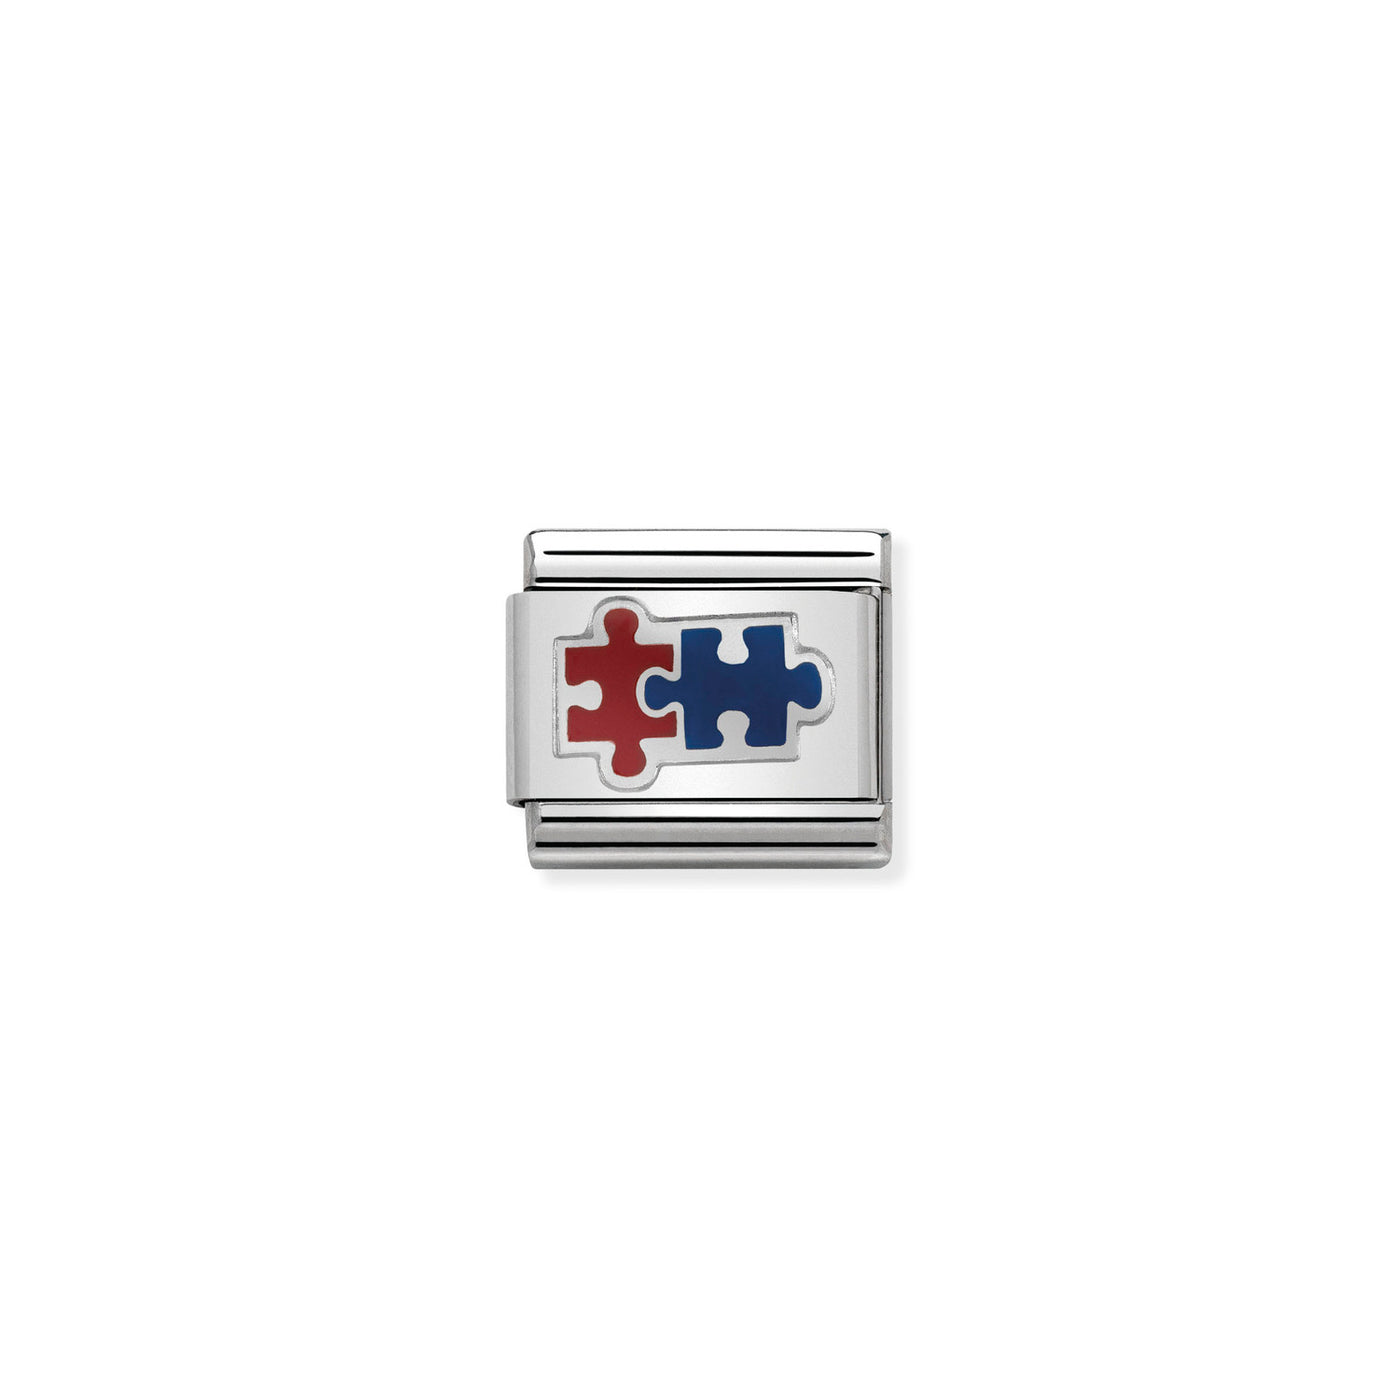 Nomination Classic Red Blue Jigsaw Puzzle Charm